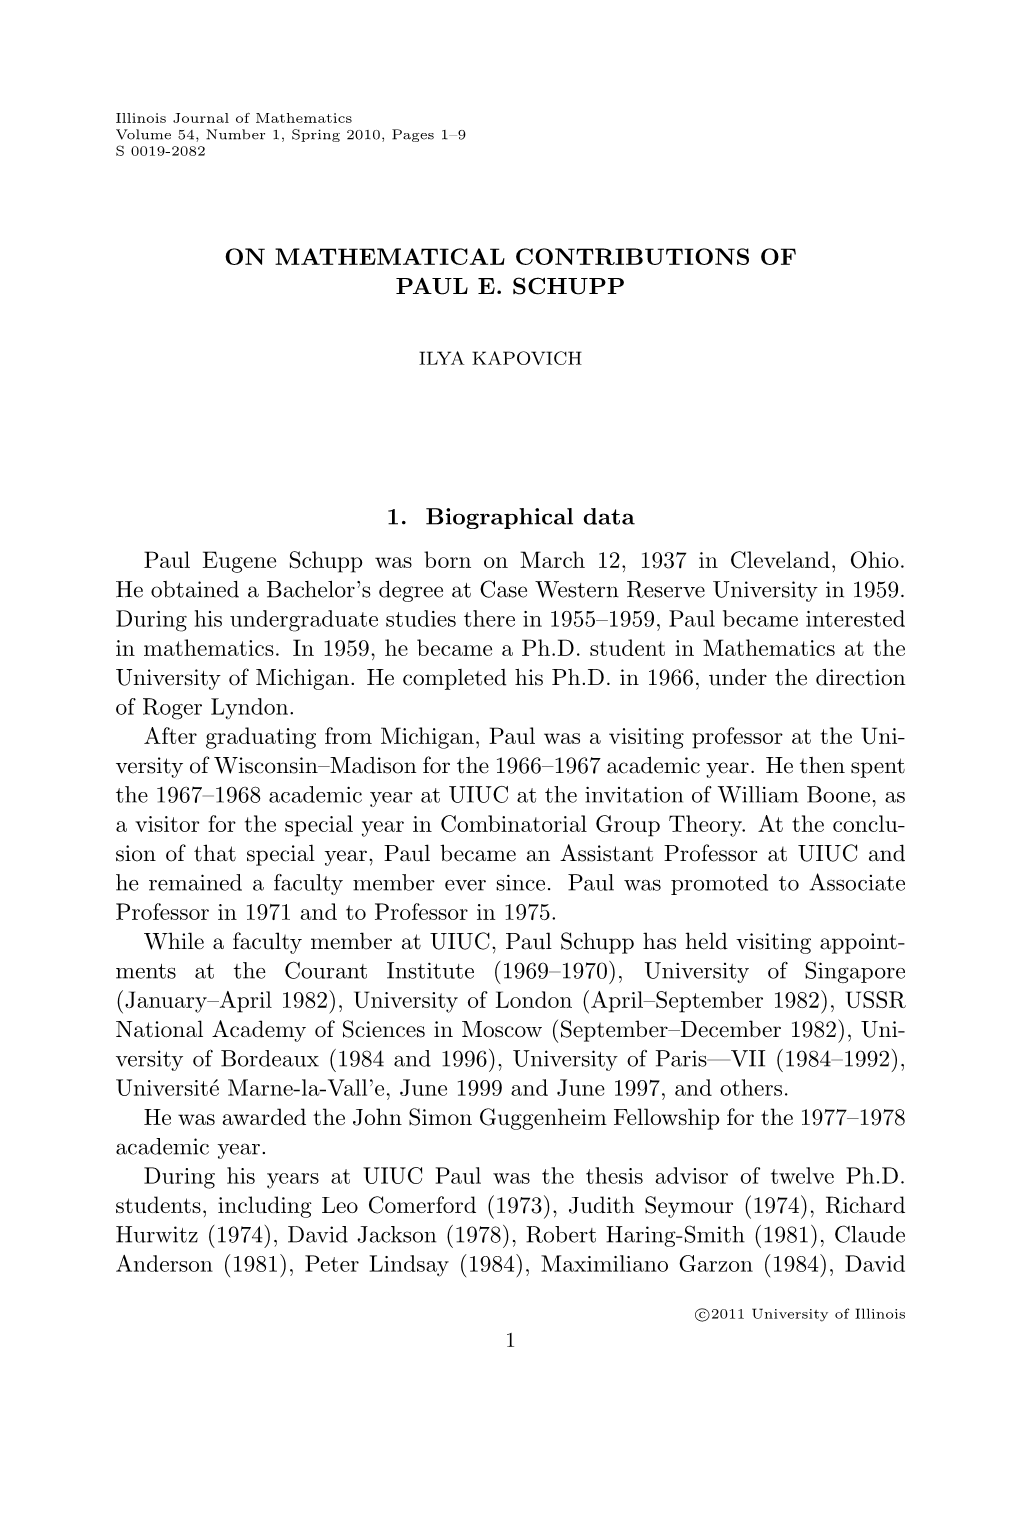 On Mathematical Contributions of Paul E. Schupp